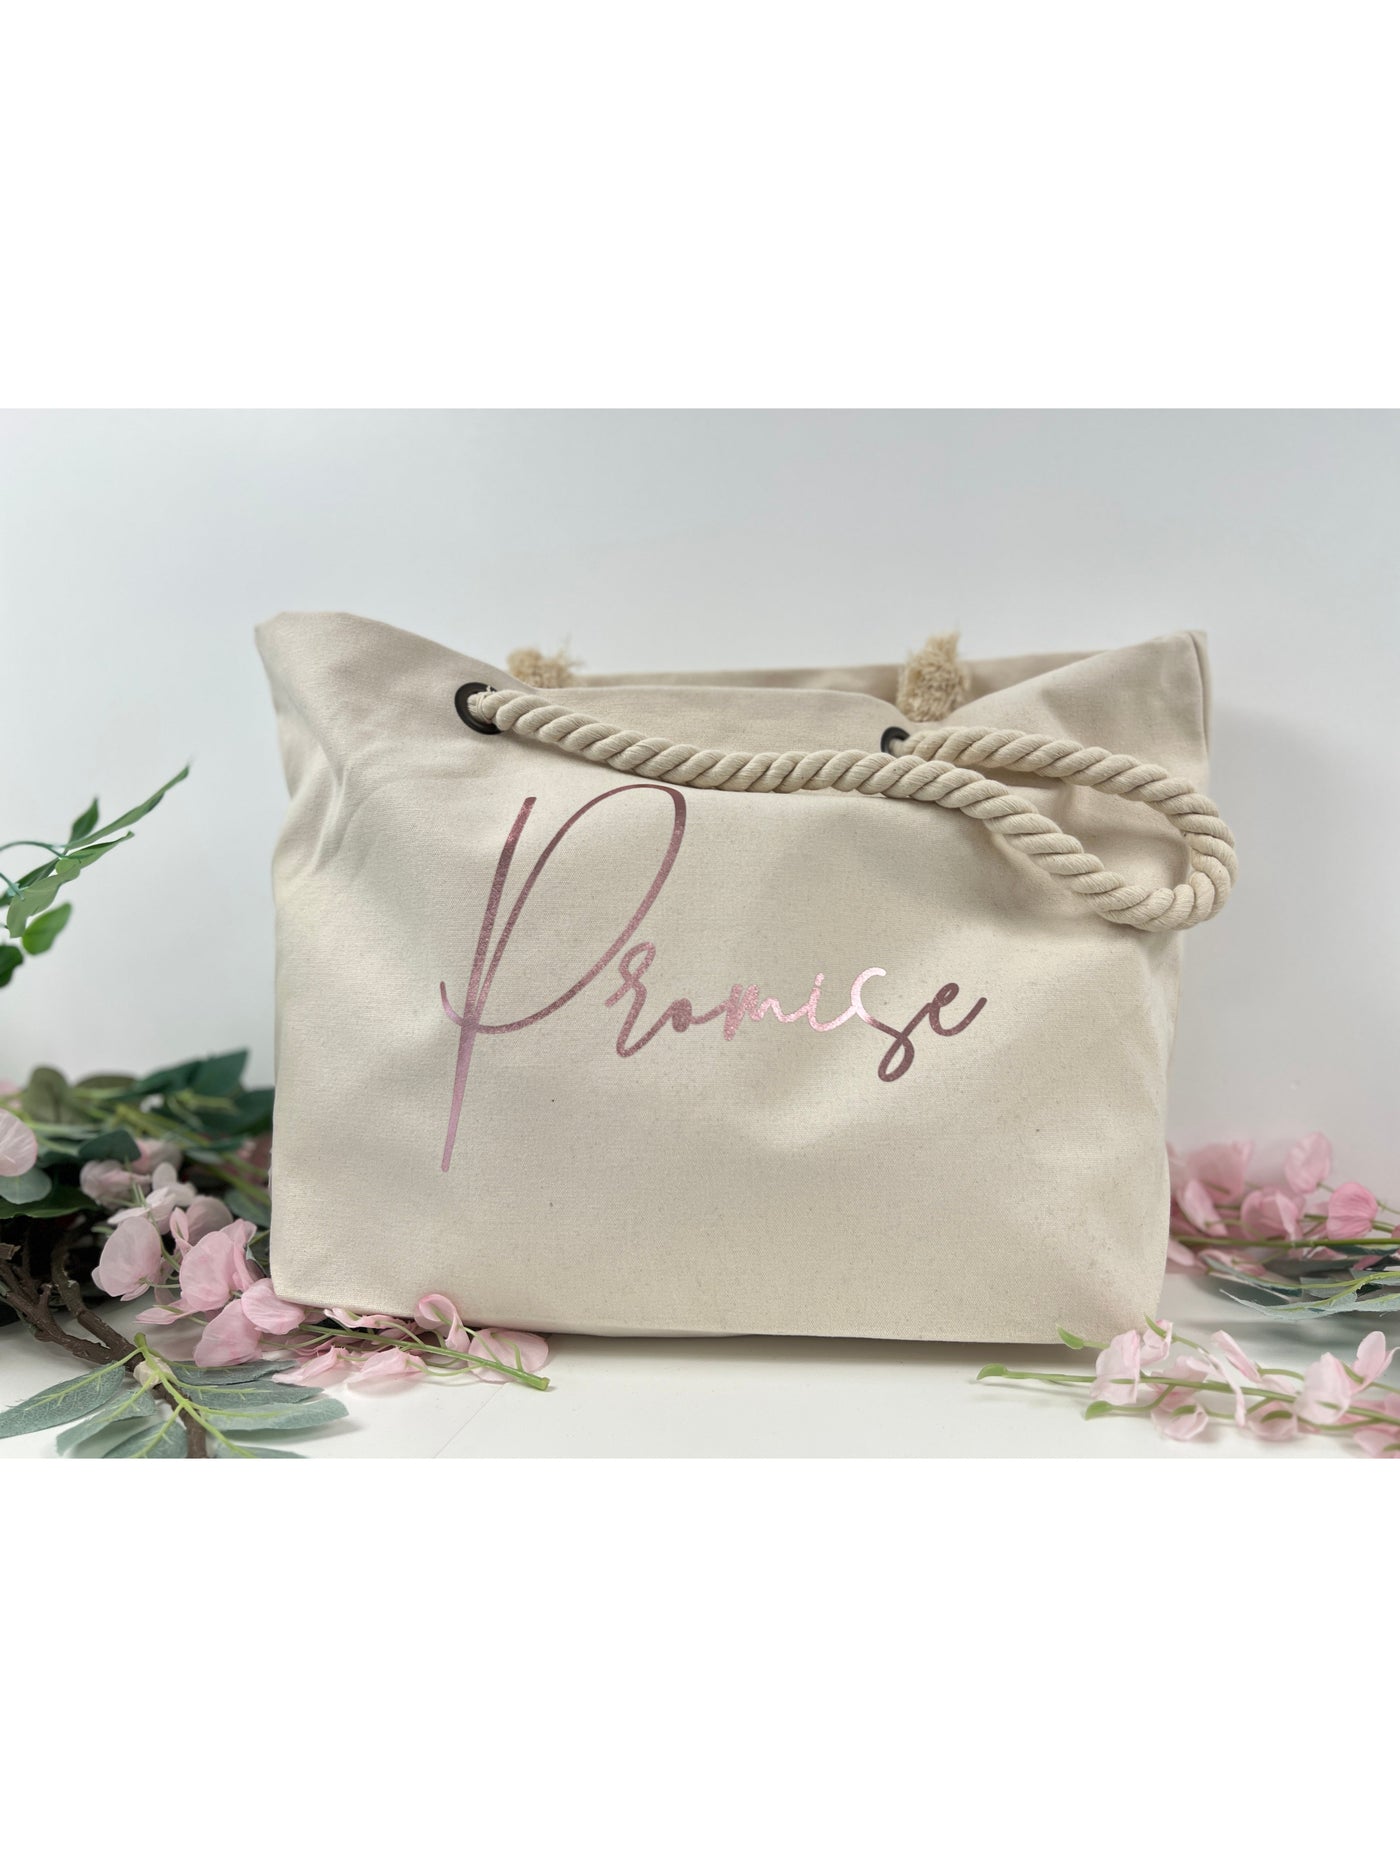 Personalised Beach Tote Bag with name